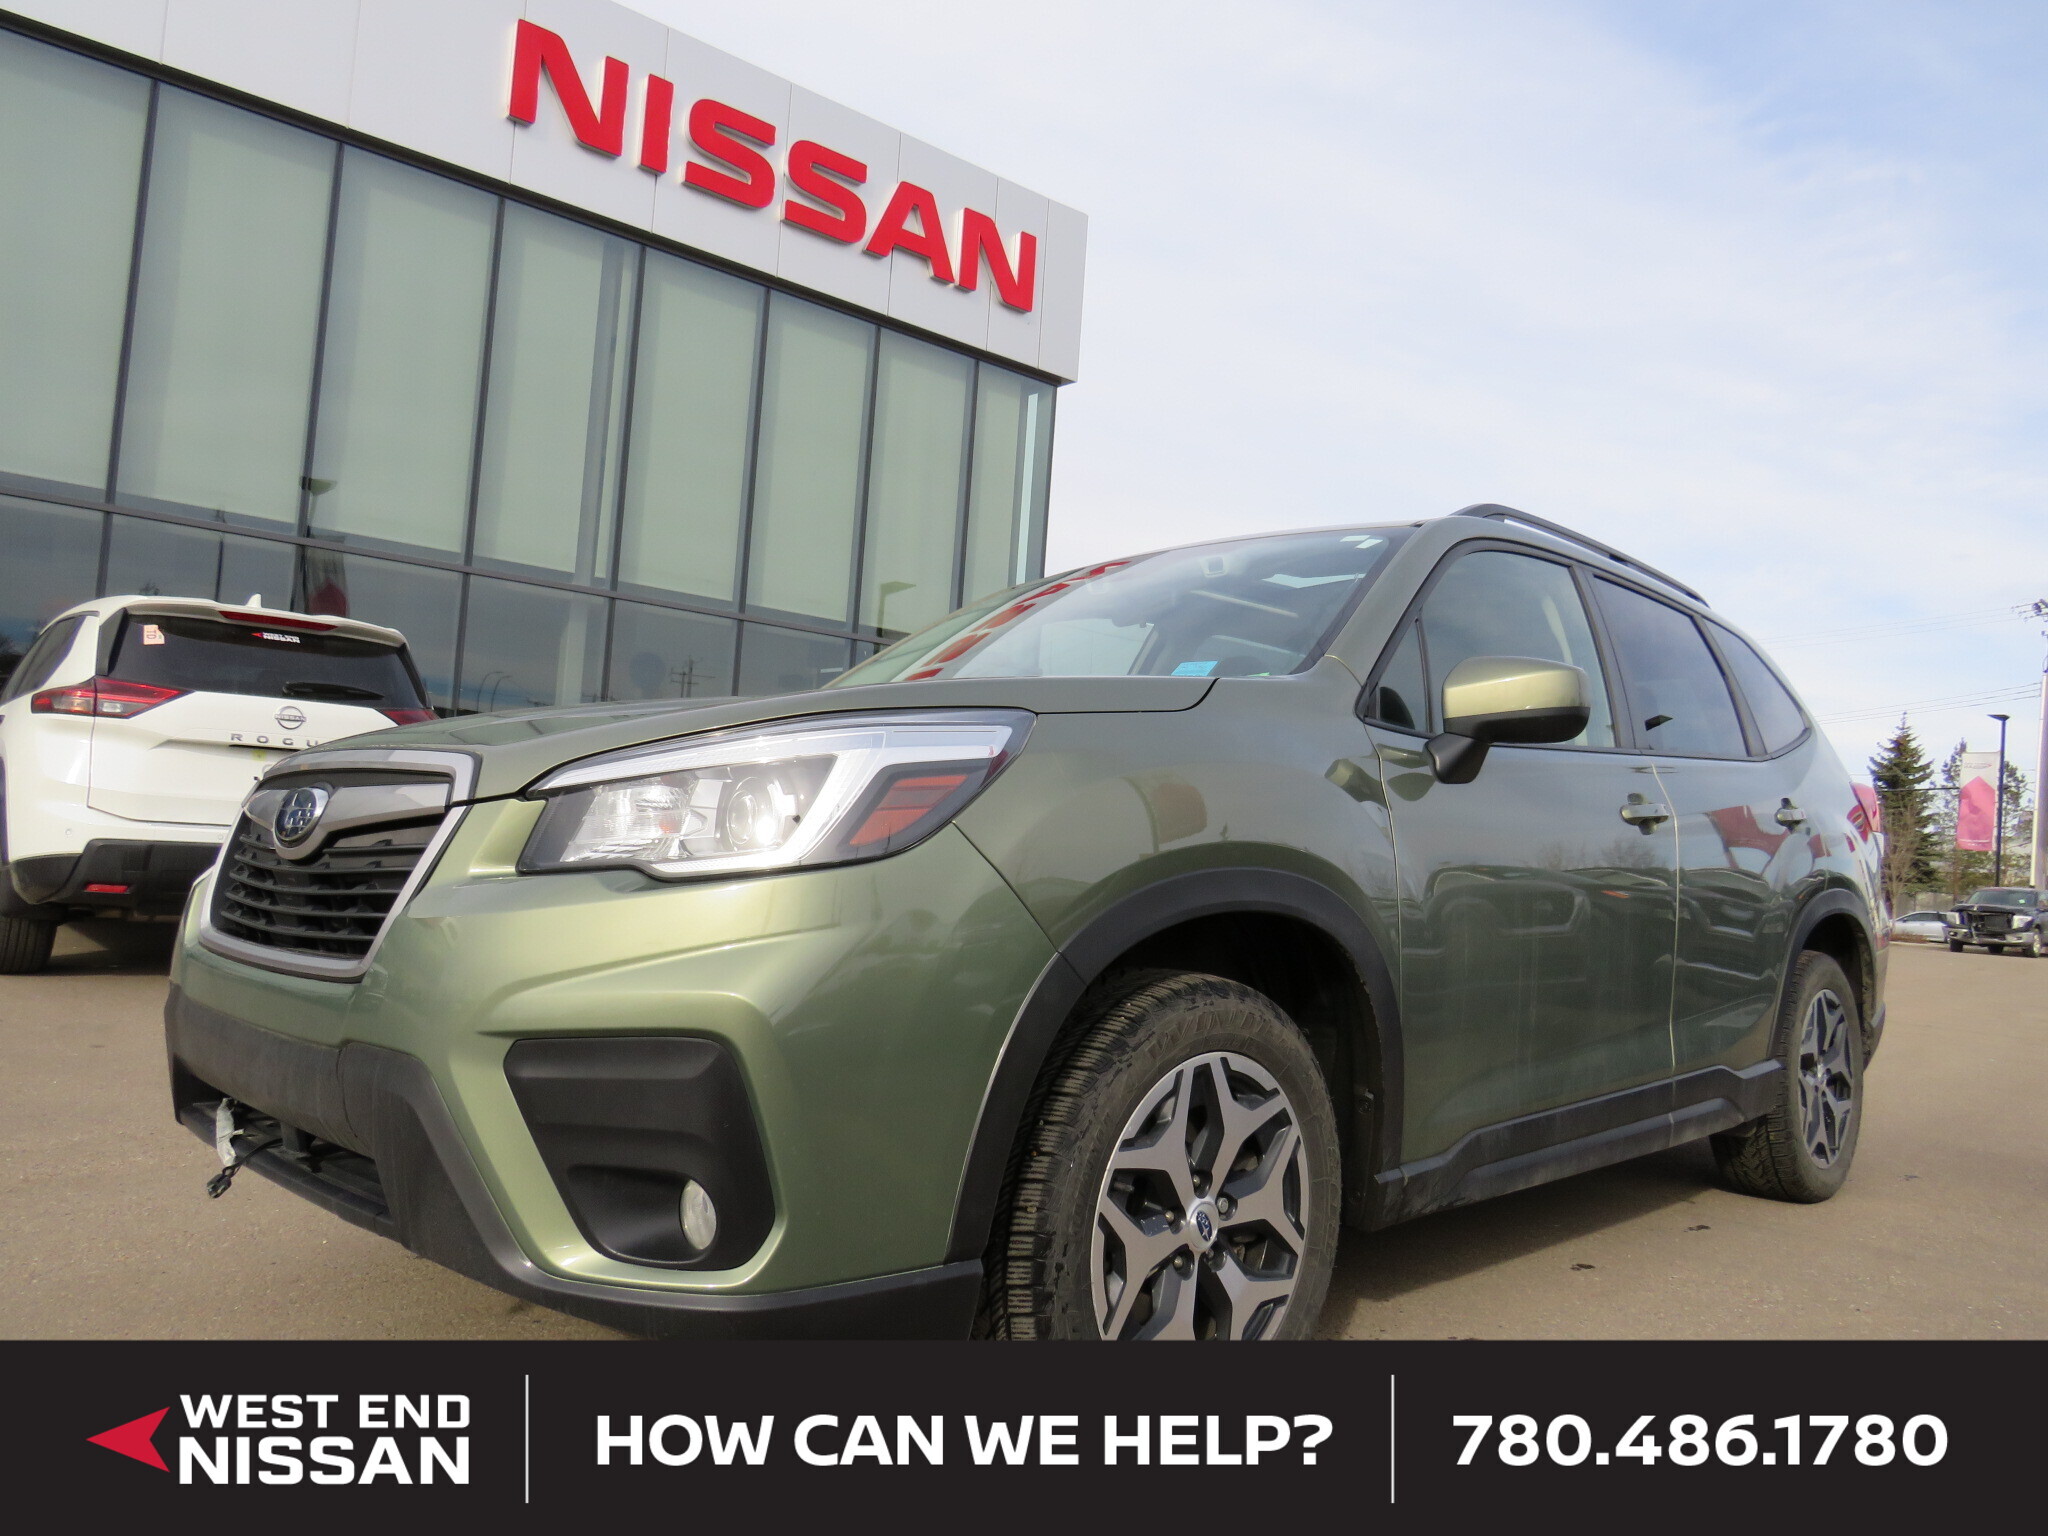 2020 Subaru Forester LIMITED AWD - EXCELLENT SHAPE!